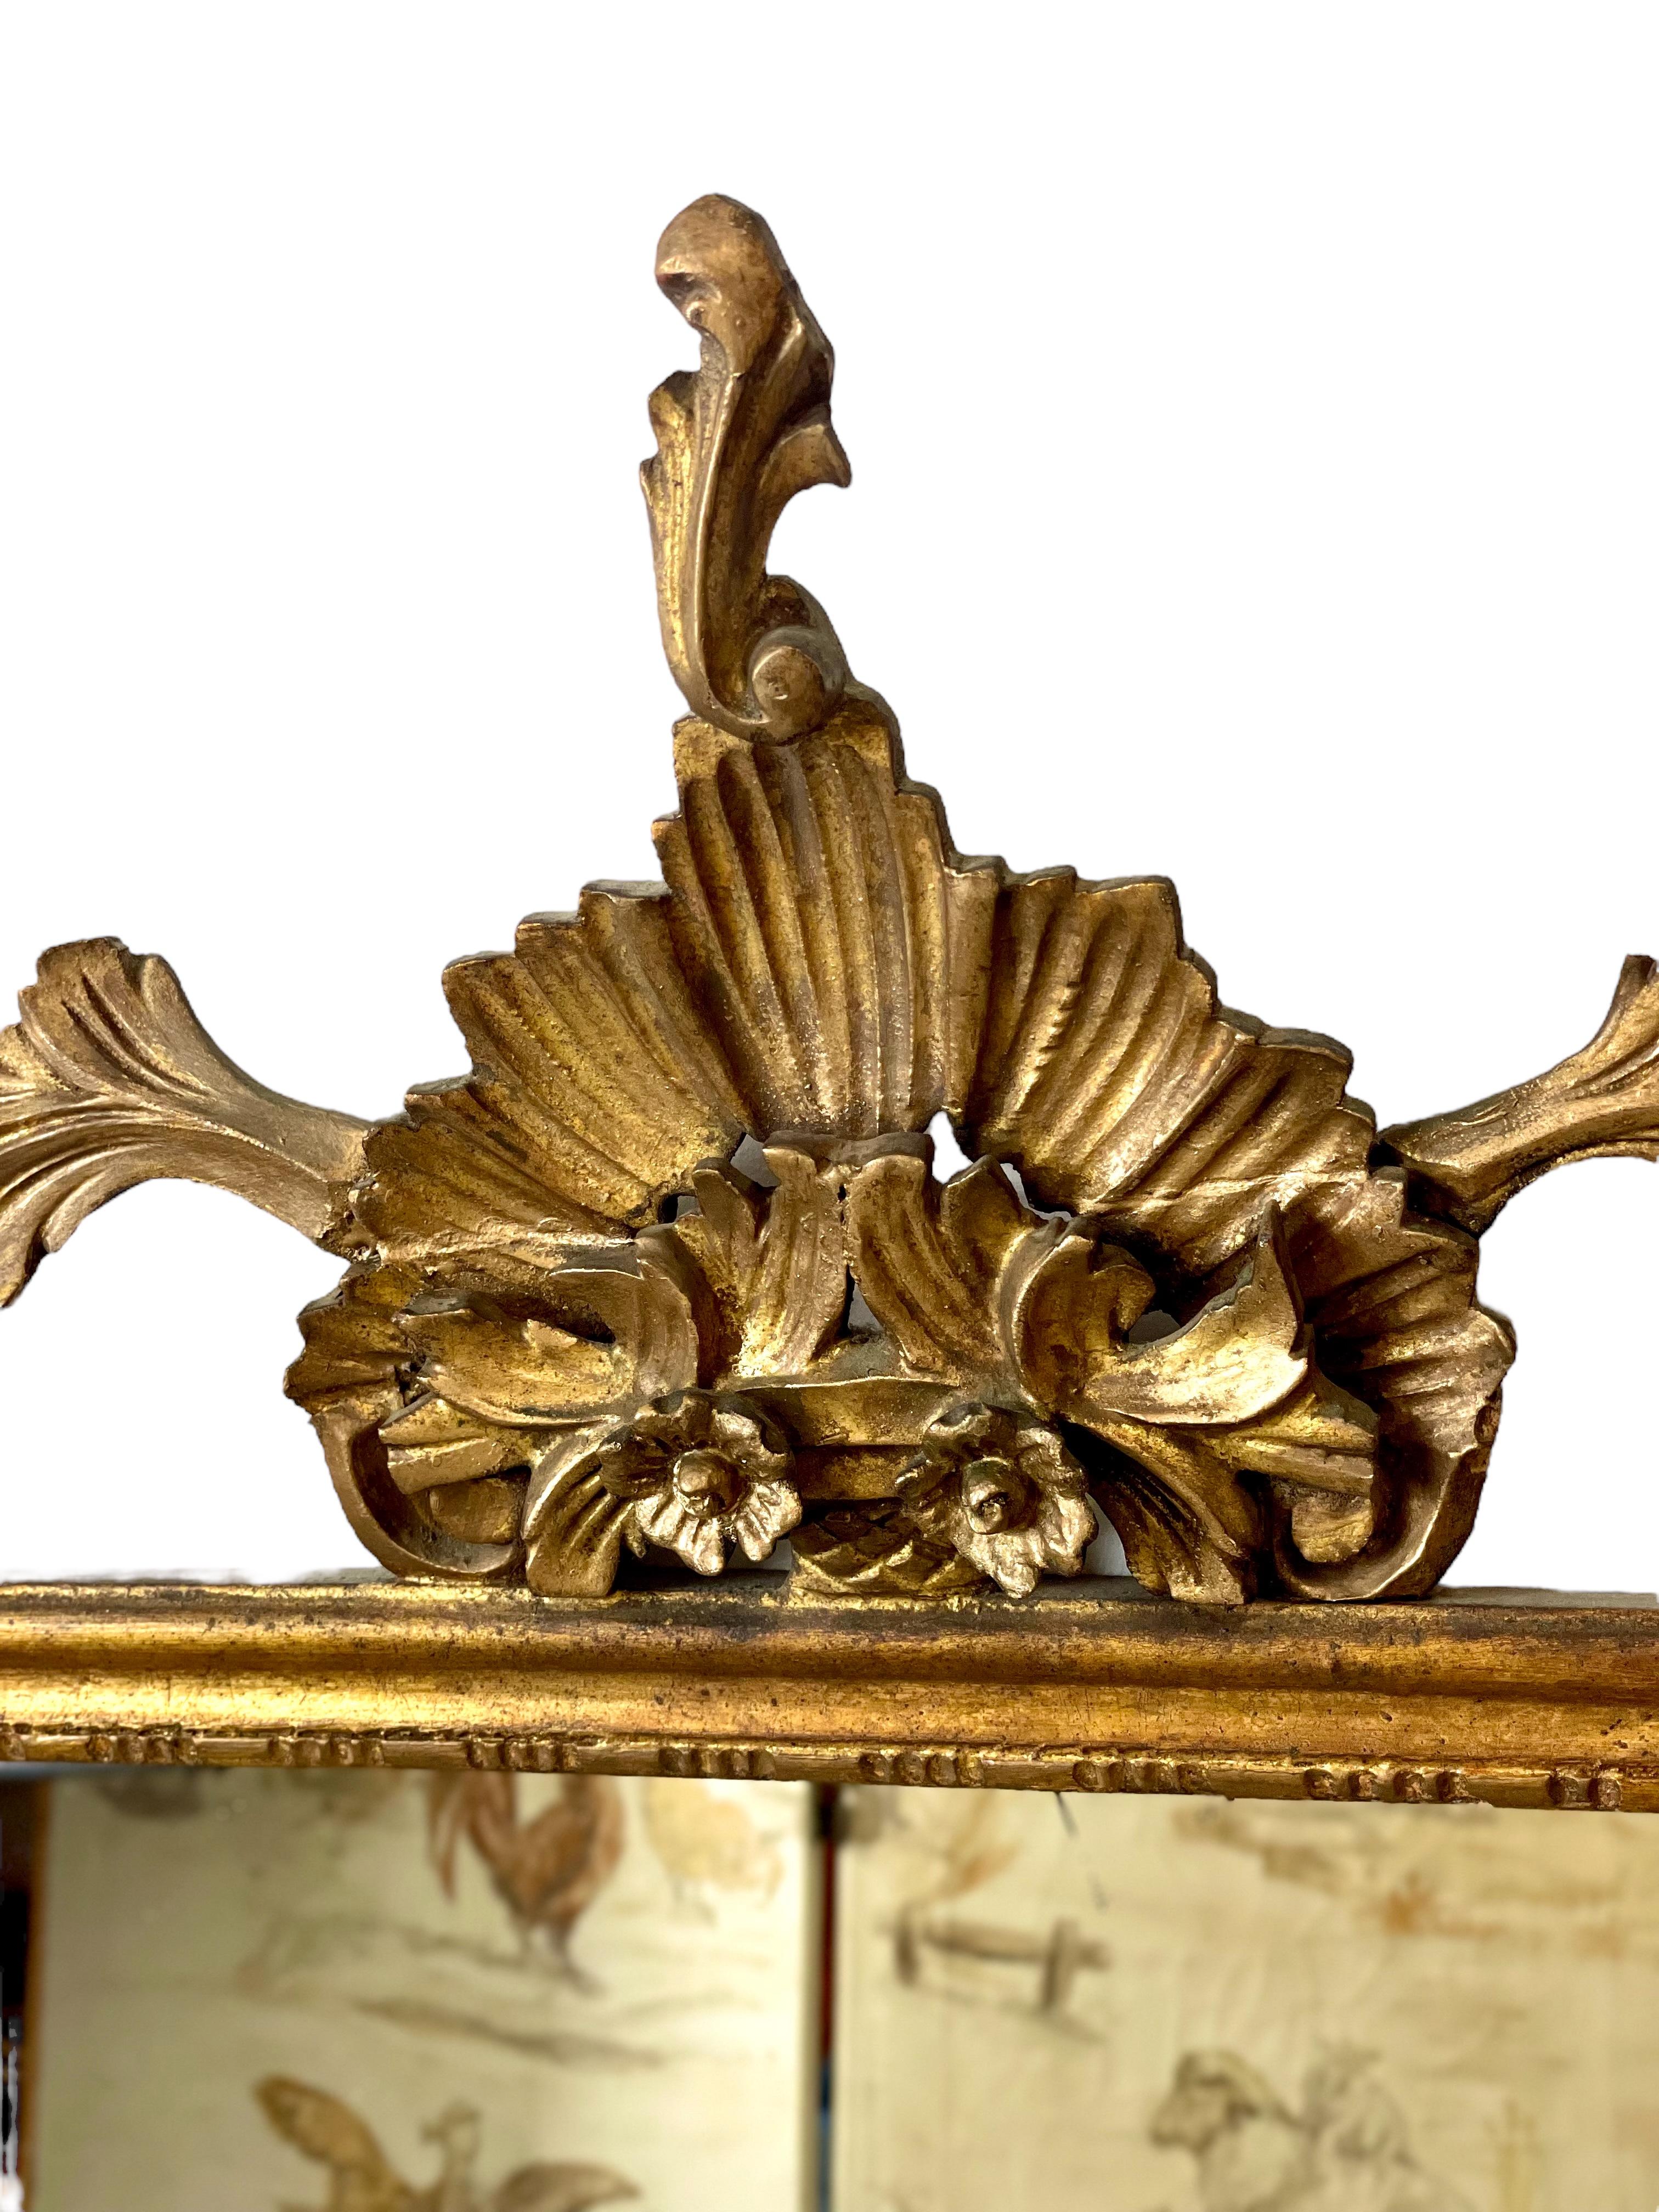 A very fine 19th century mantle mirror in gilded wood and stucco. The rectangular mirror plate is enclosed within a narrow gilt frame, surmounted by an outsize and ornate cartouche crest, with trailing swags of delicately carved acanthus leaves and